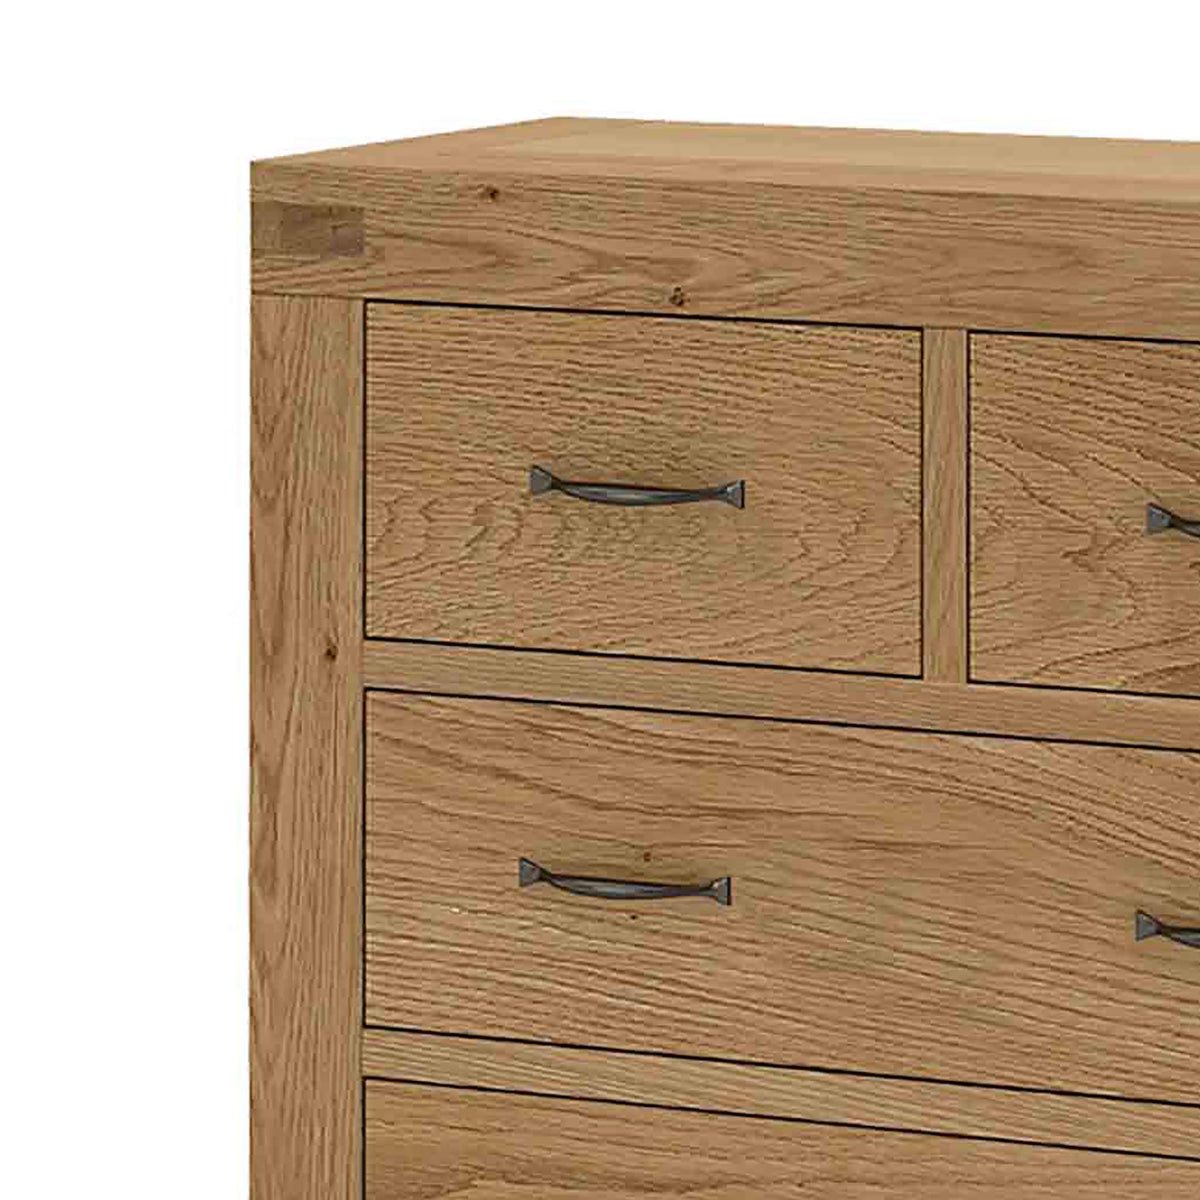 The Abbey Grande Bedroom Chest of Drawers - Close Up Of Top Drawer